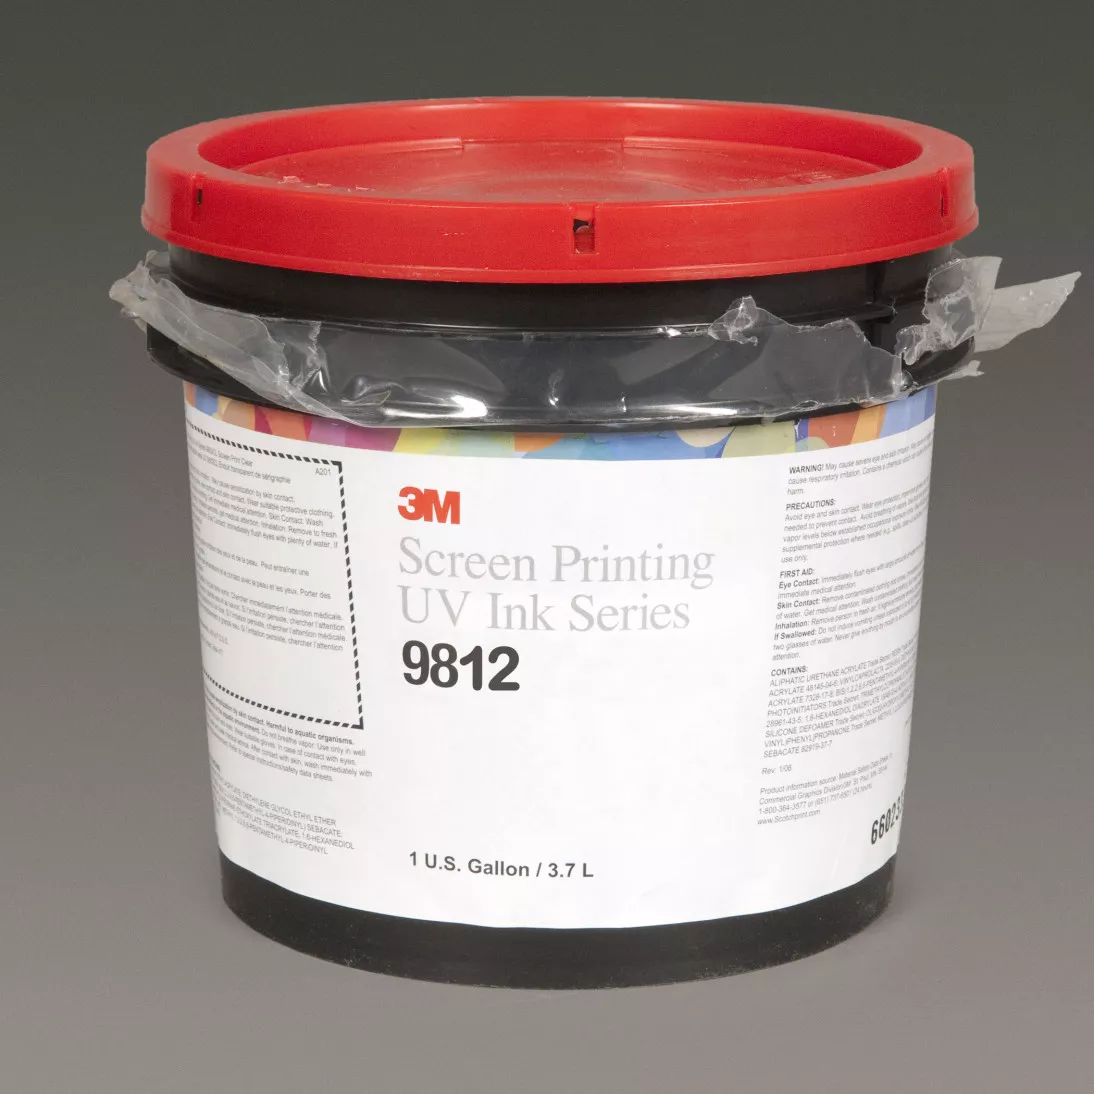 3M™ Screen Printing UV Ink 9812, Magenta, 1 Gallon Container